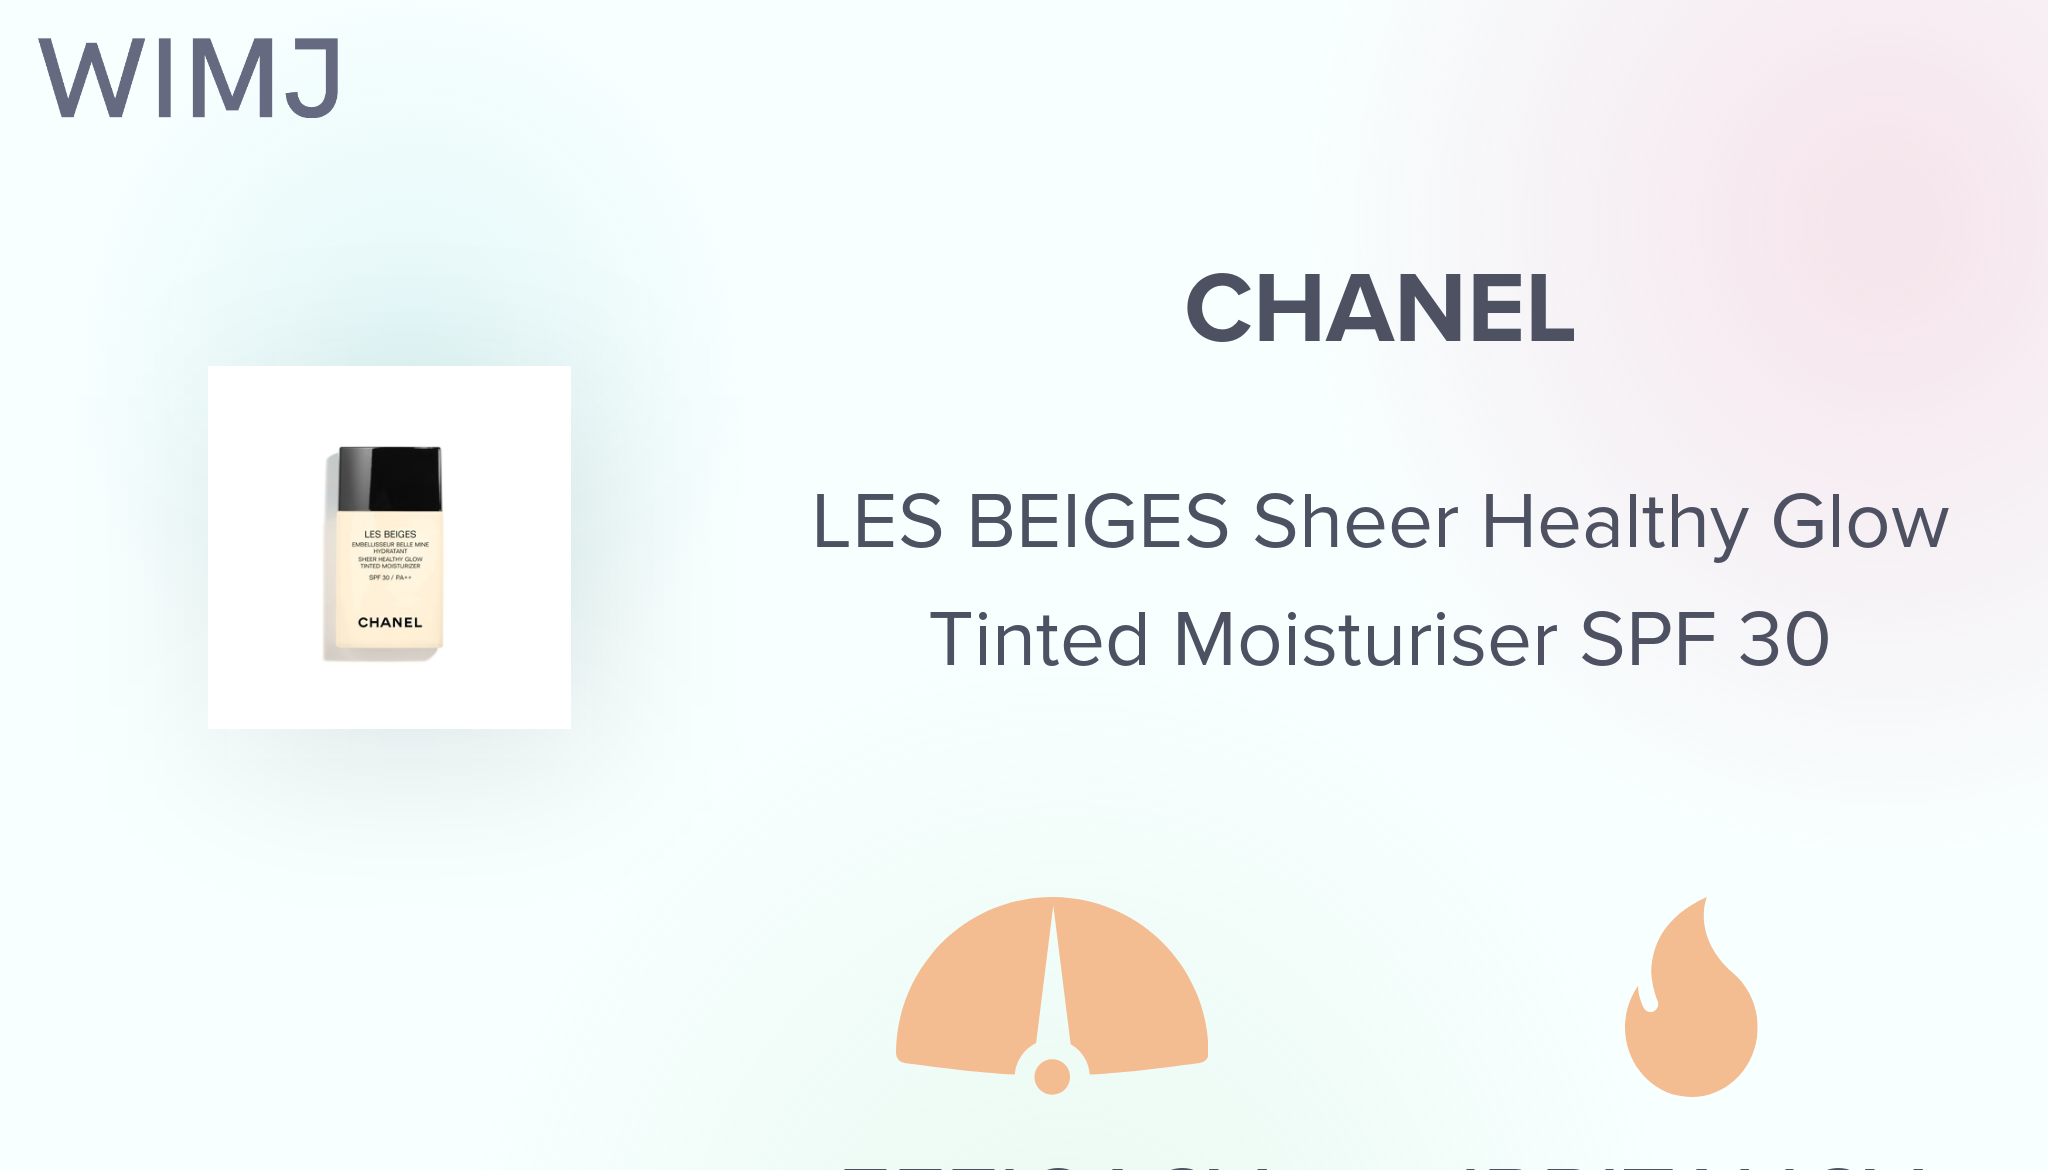 Chanel Les Beiges Sheer Healthy Glow Tinted Moisturizer – Weeks of